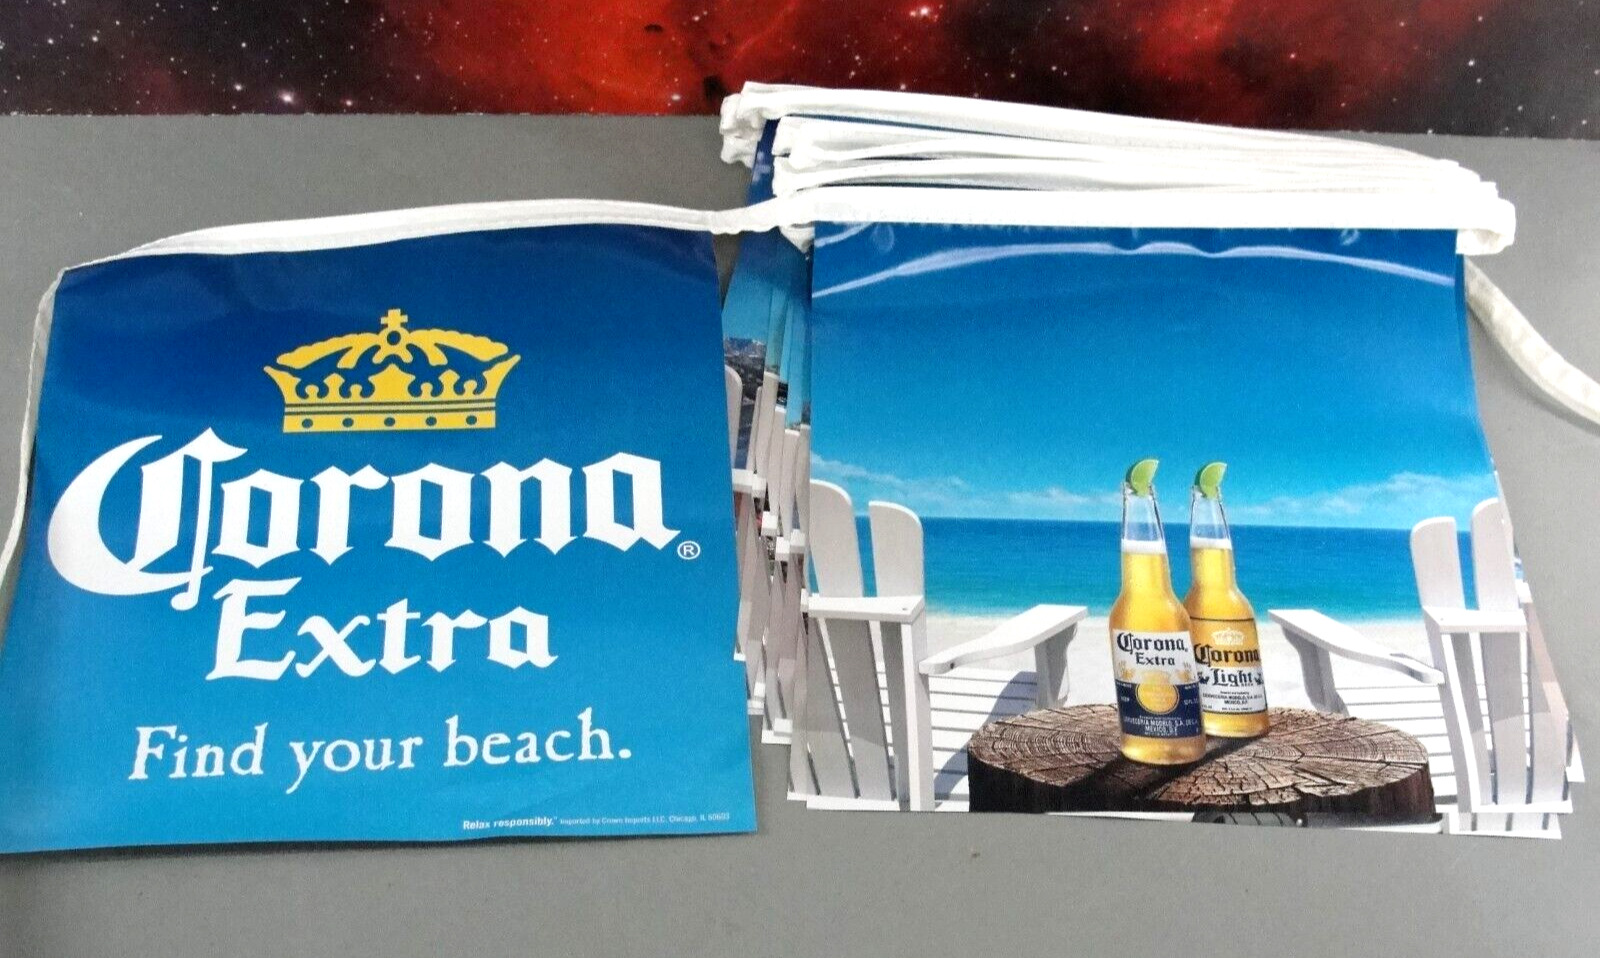 CORONA BEER 👑 VINYL STRING PENNANT BANNER FIND YOUR BEACH BAR PARTY DECOR NEW